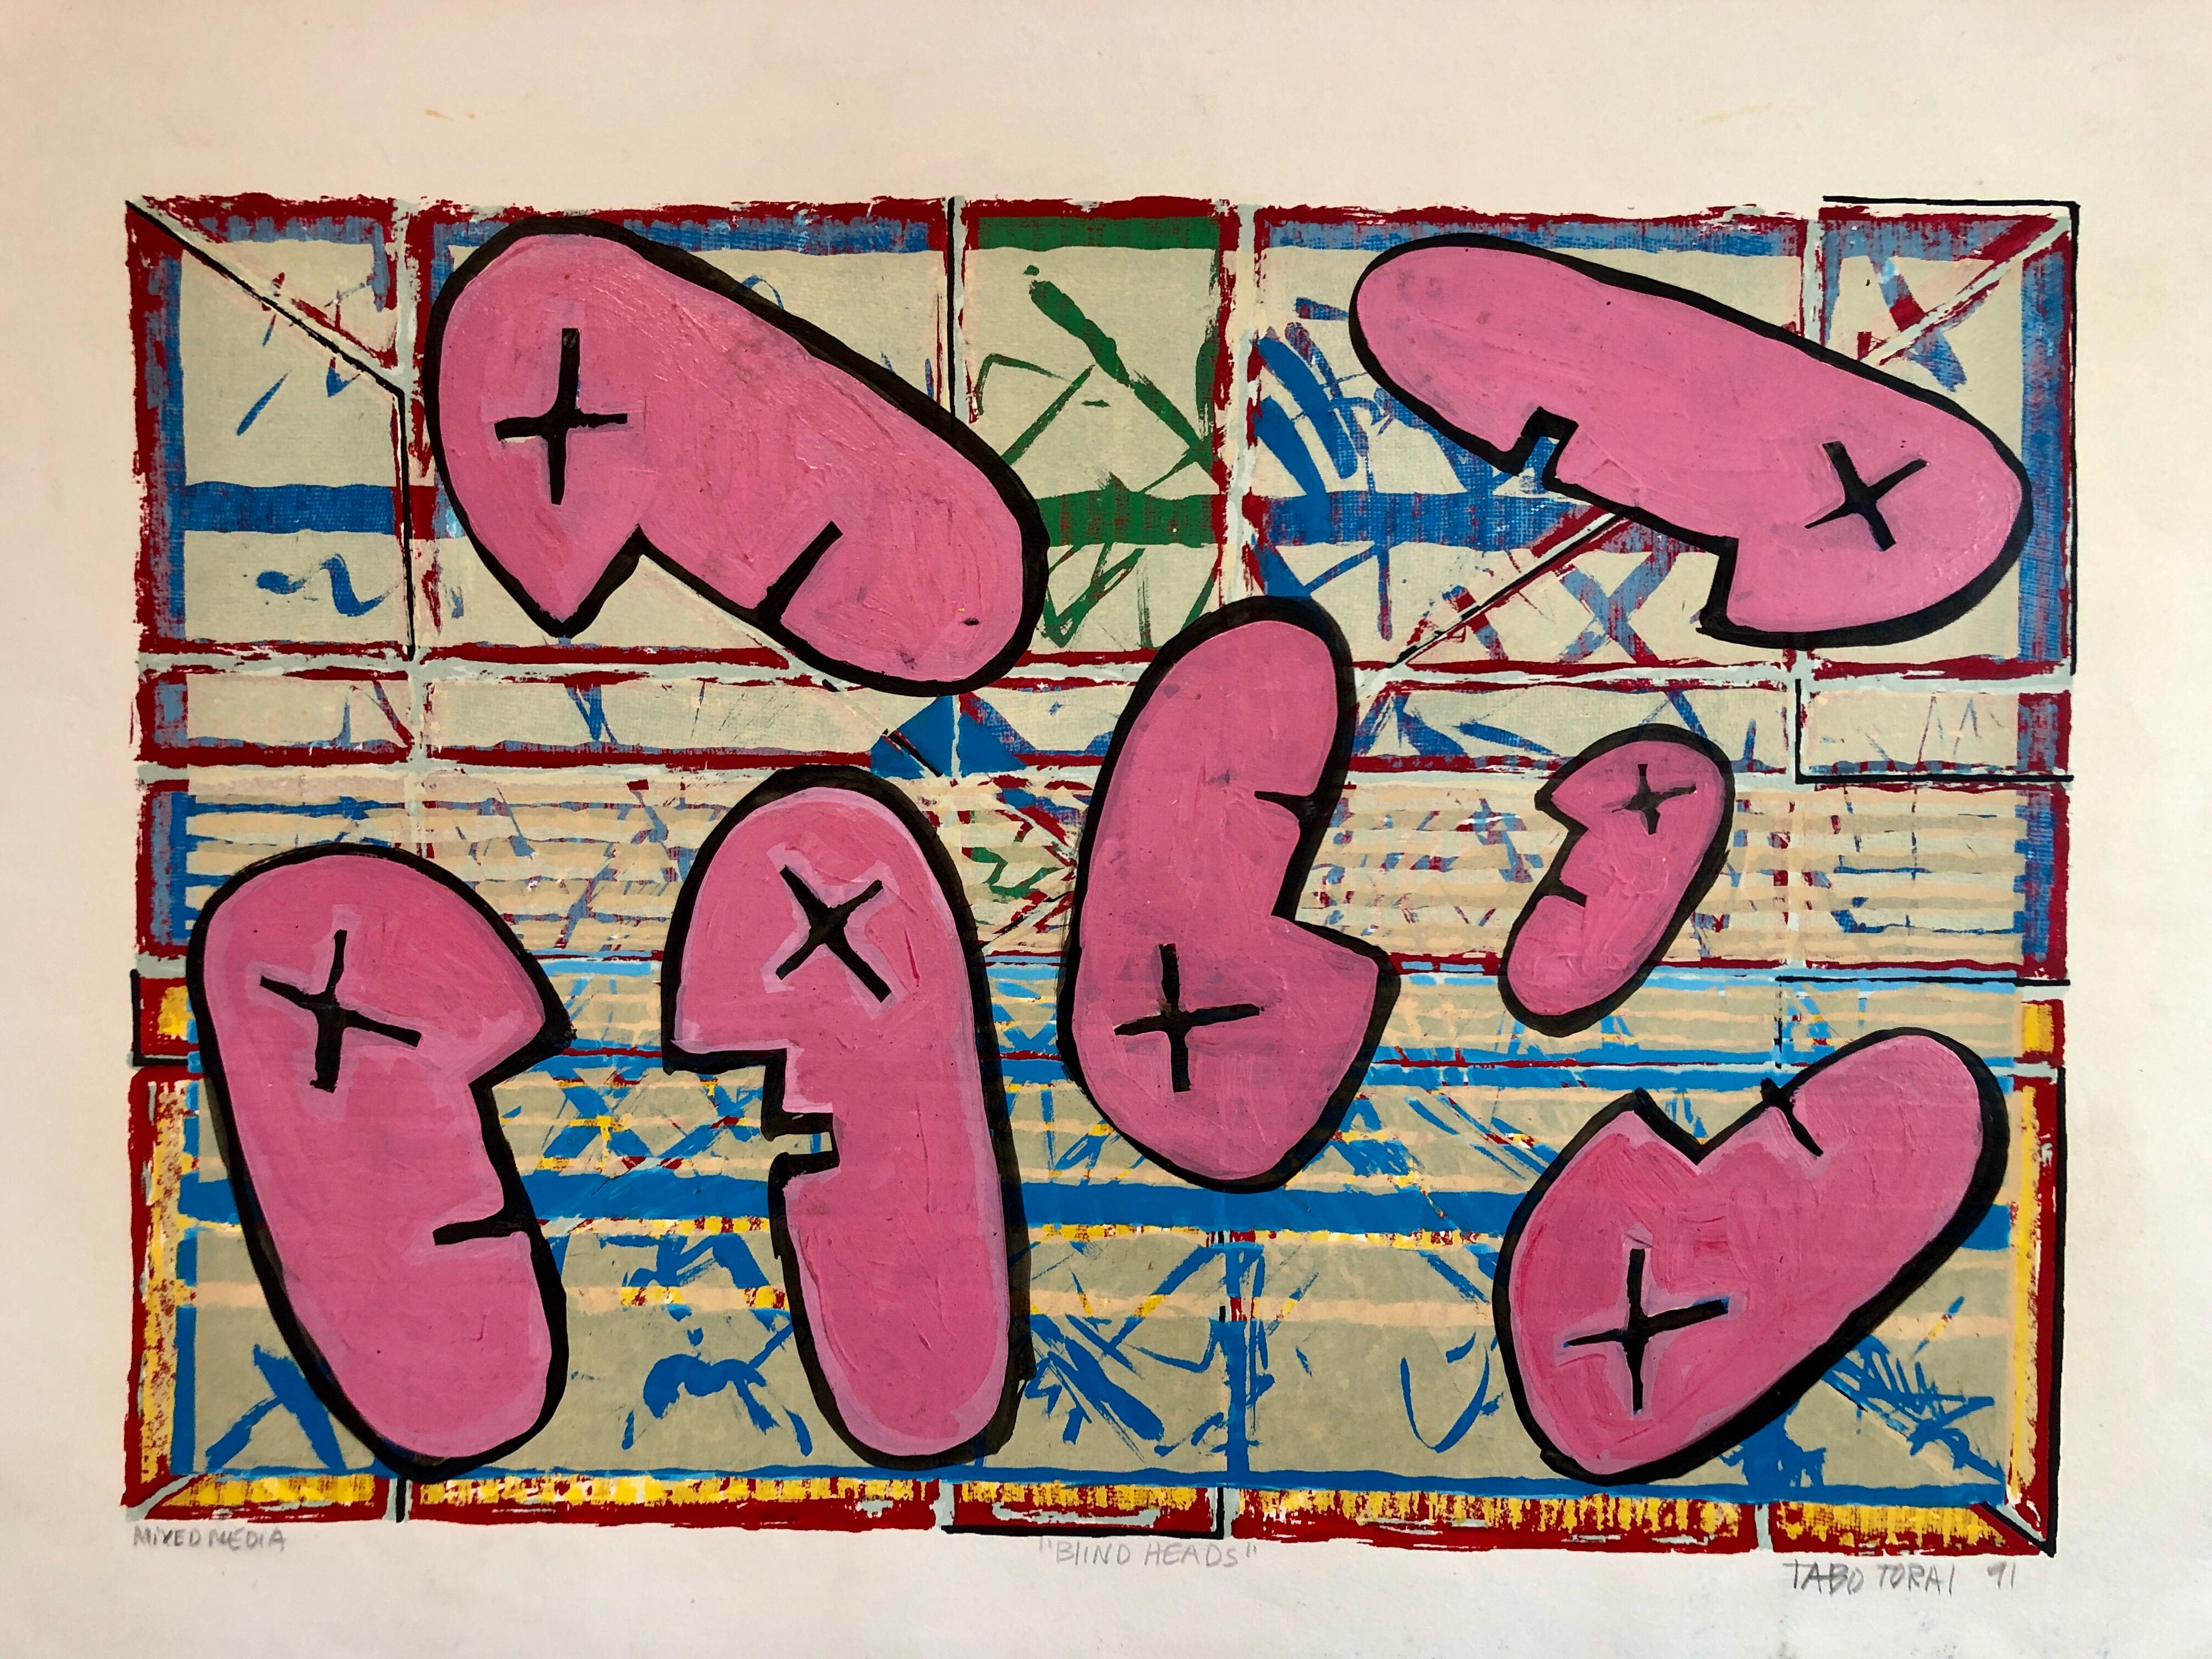 Tabo Toral Figurative Painting - 1990's Graffiti Artist. Mixed Media Painting Bold Colorful New Wave NYC Panama 